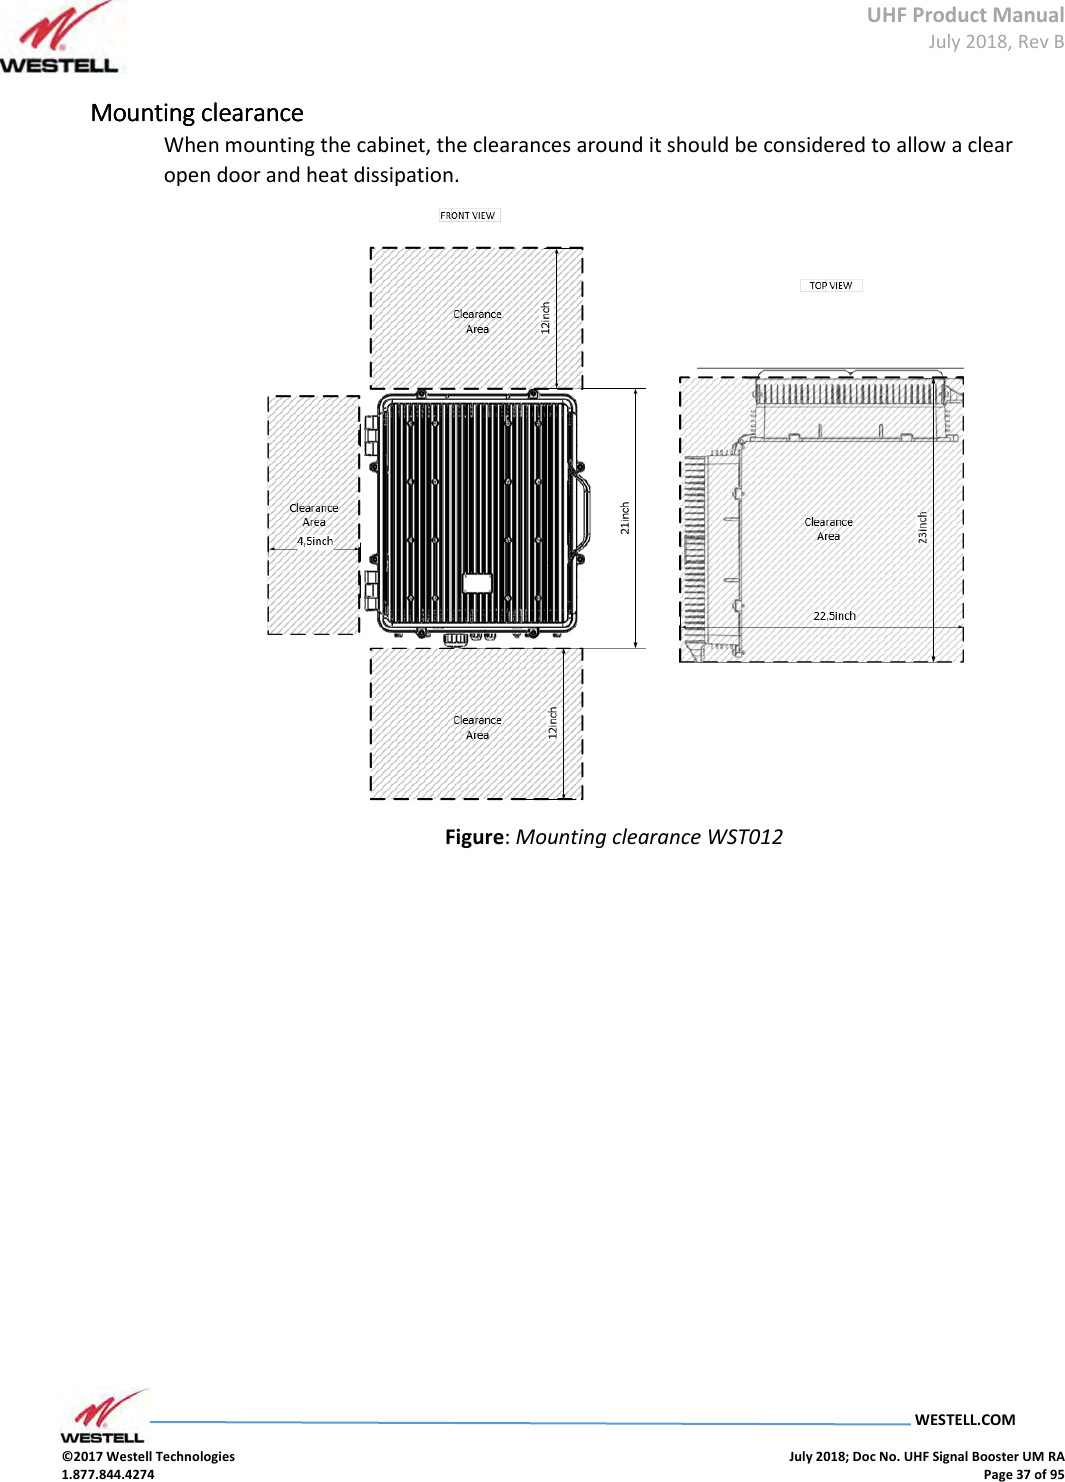 UHF Product Manual July 2018, Rev B   WESTELL.COM  ©2017 Westell Technologies    July 2018; Doc No. UHF Signal Booster UM RA 1.877.844.4274    Page 37 of 95  Mounting clearanceMounting clearanceMounting clearanceMounting clearance    When mounting the cabinet, the clearances around it should be considered to allow a clear open door and heat dissipation.  Figure: Mounting clearance WST012  